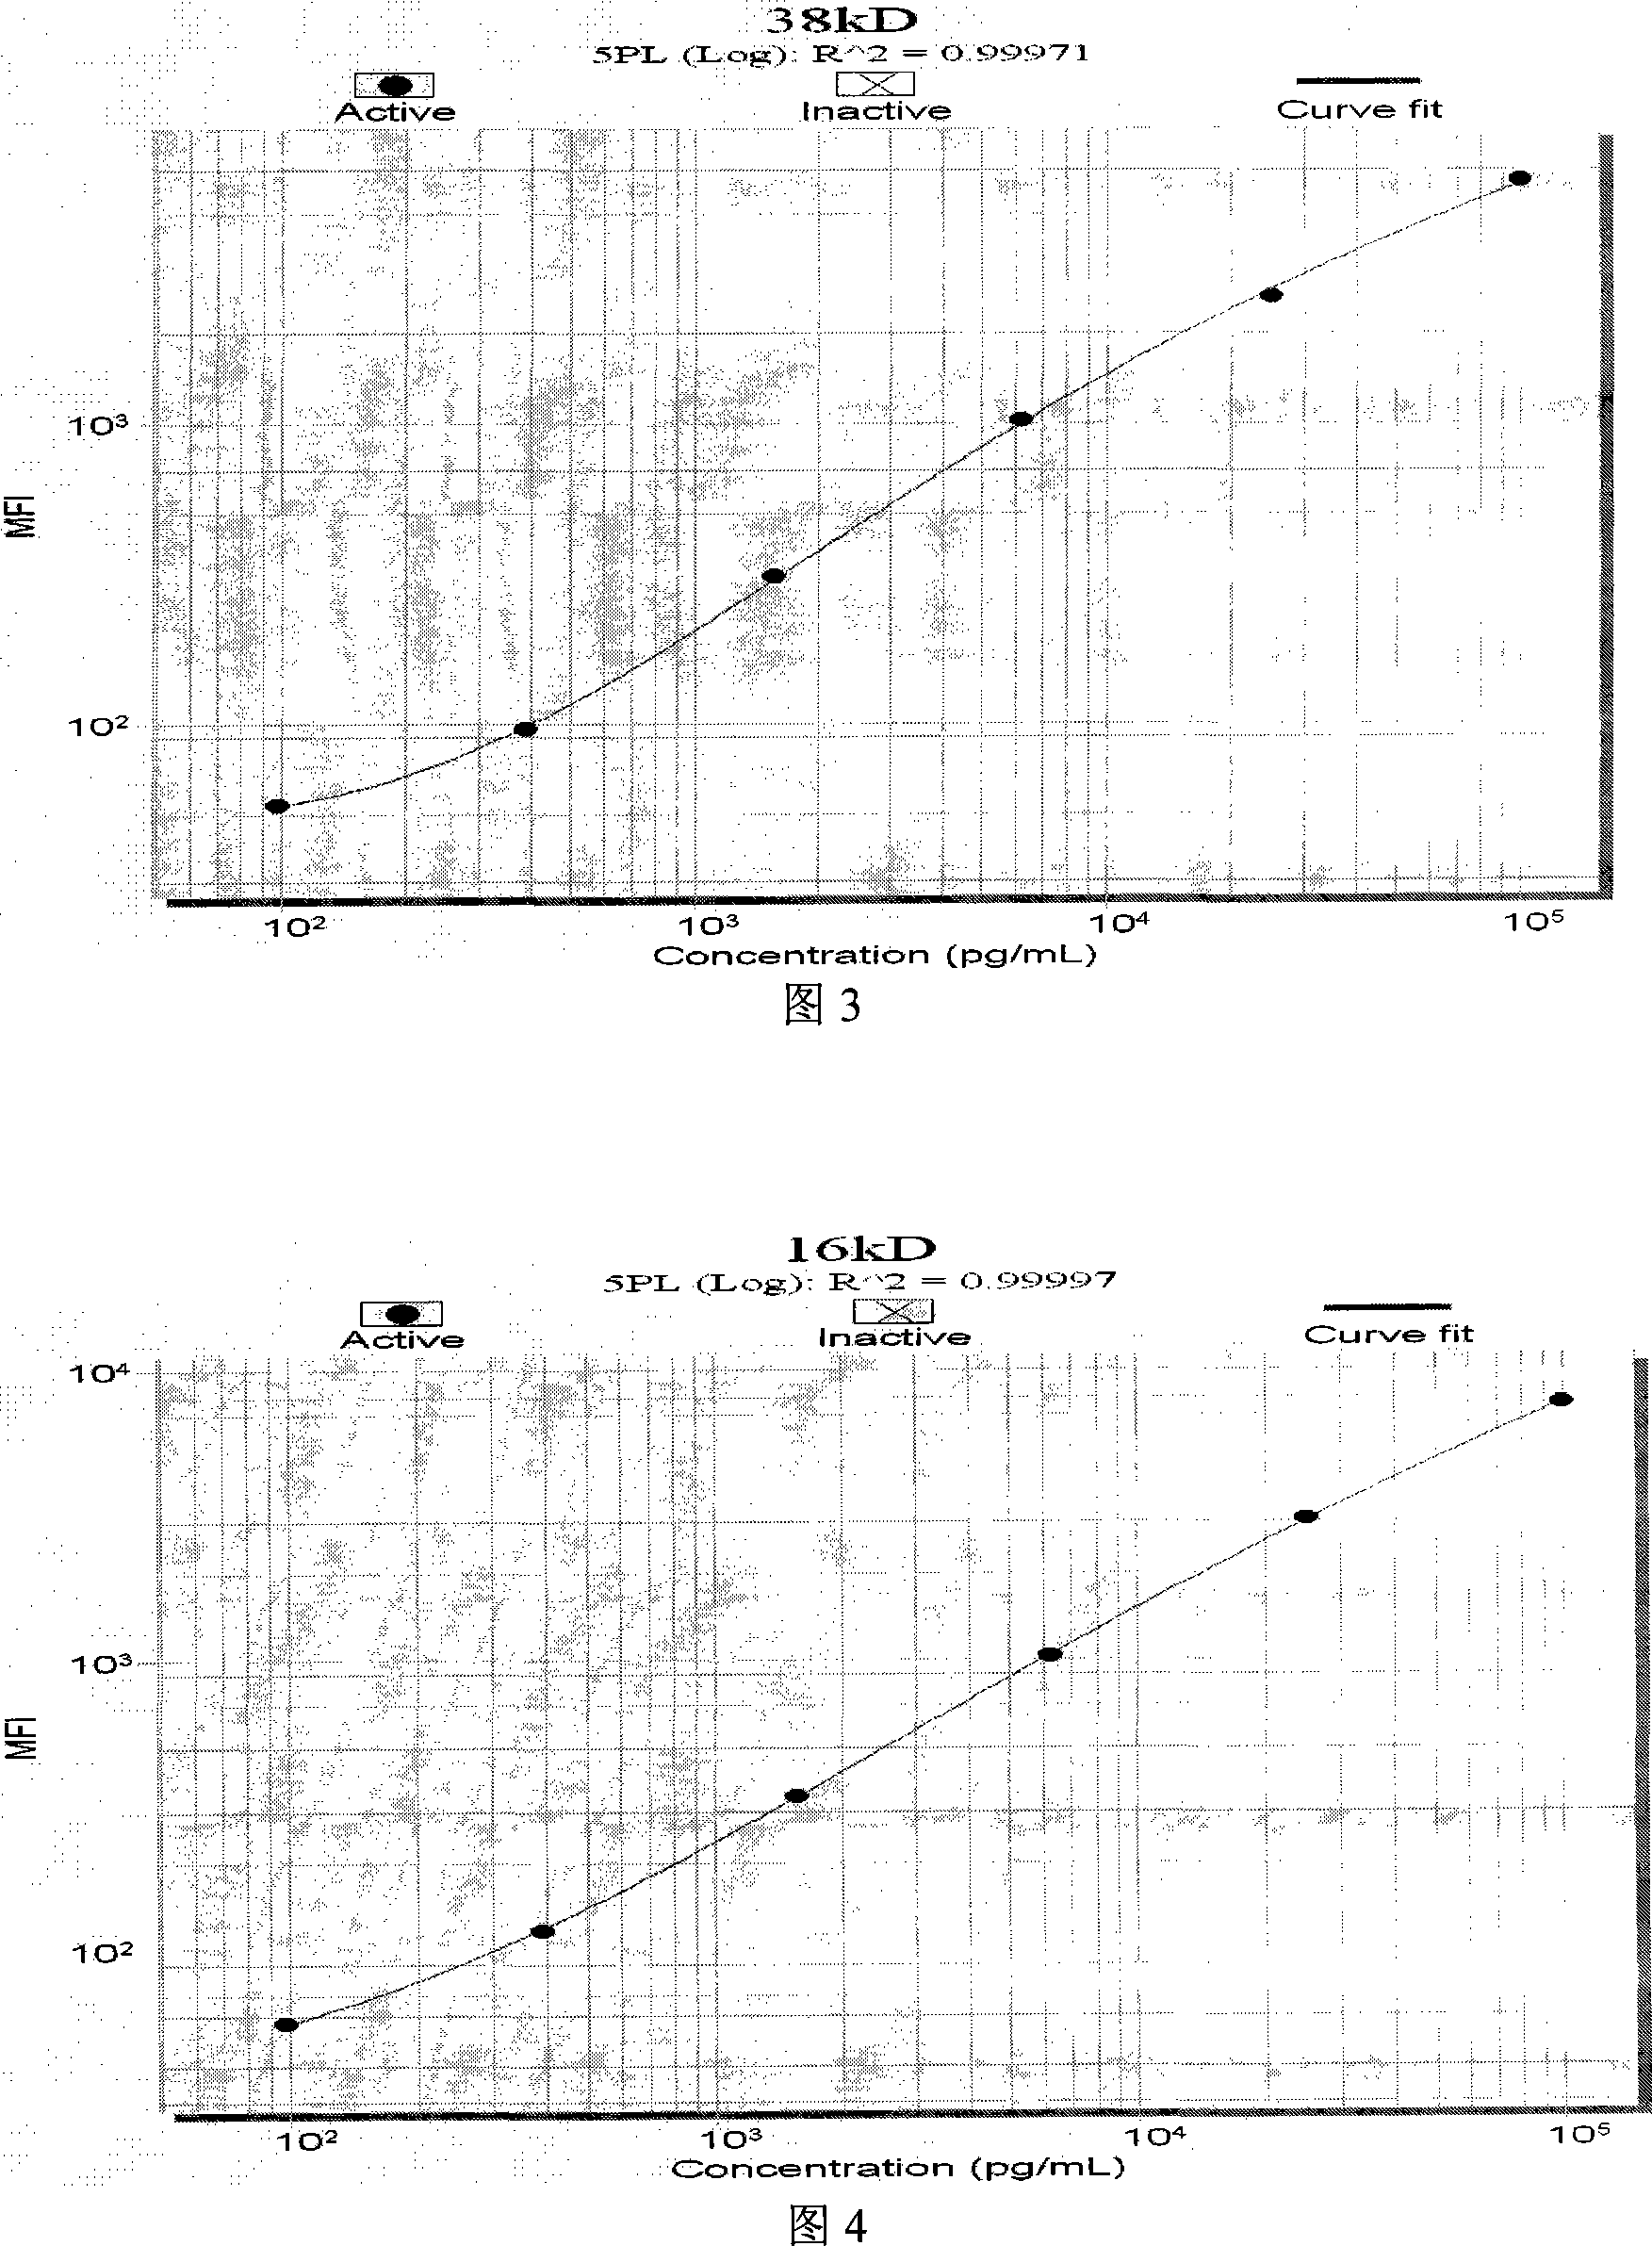 Mycobacterium tuberculosis detection liquid phase chip and method for making same